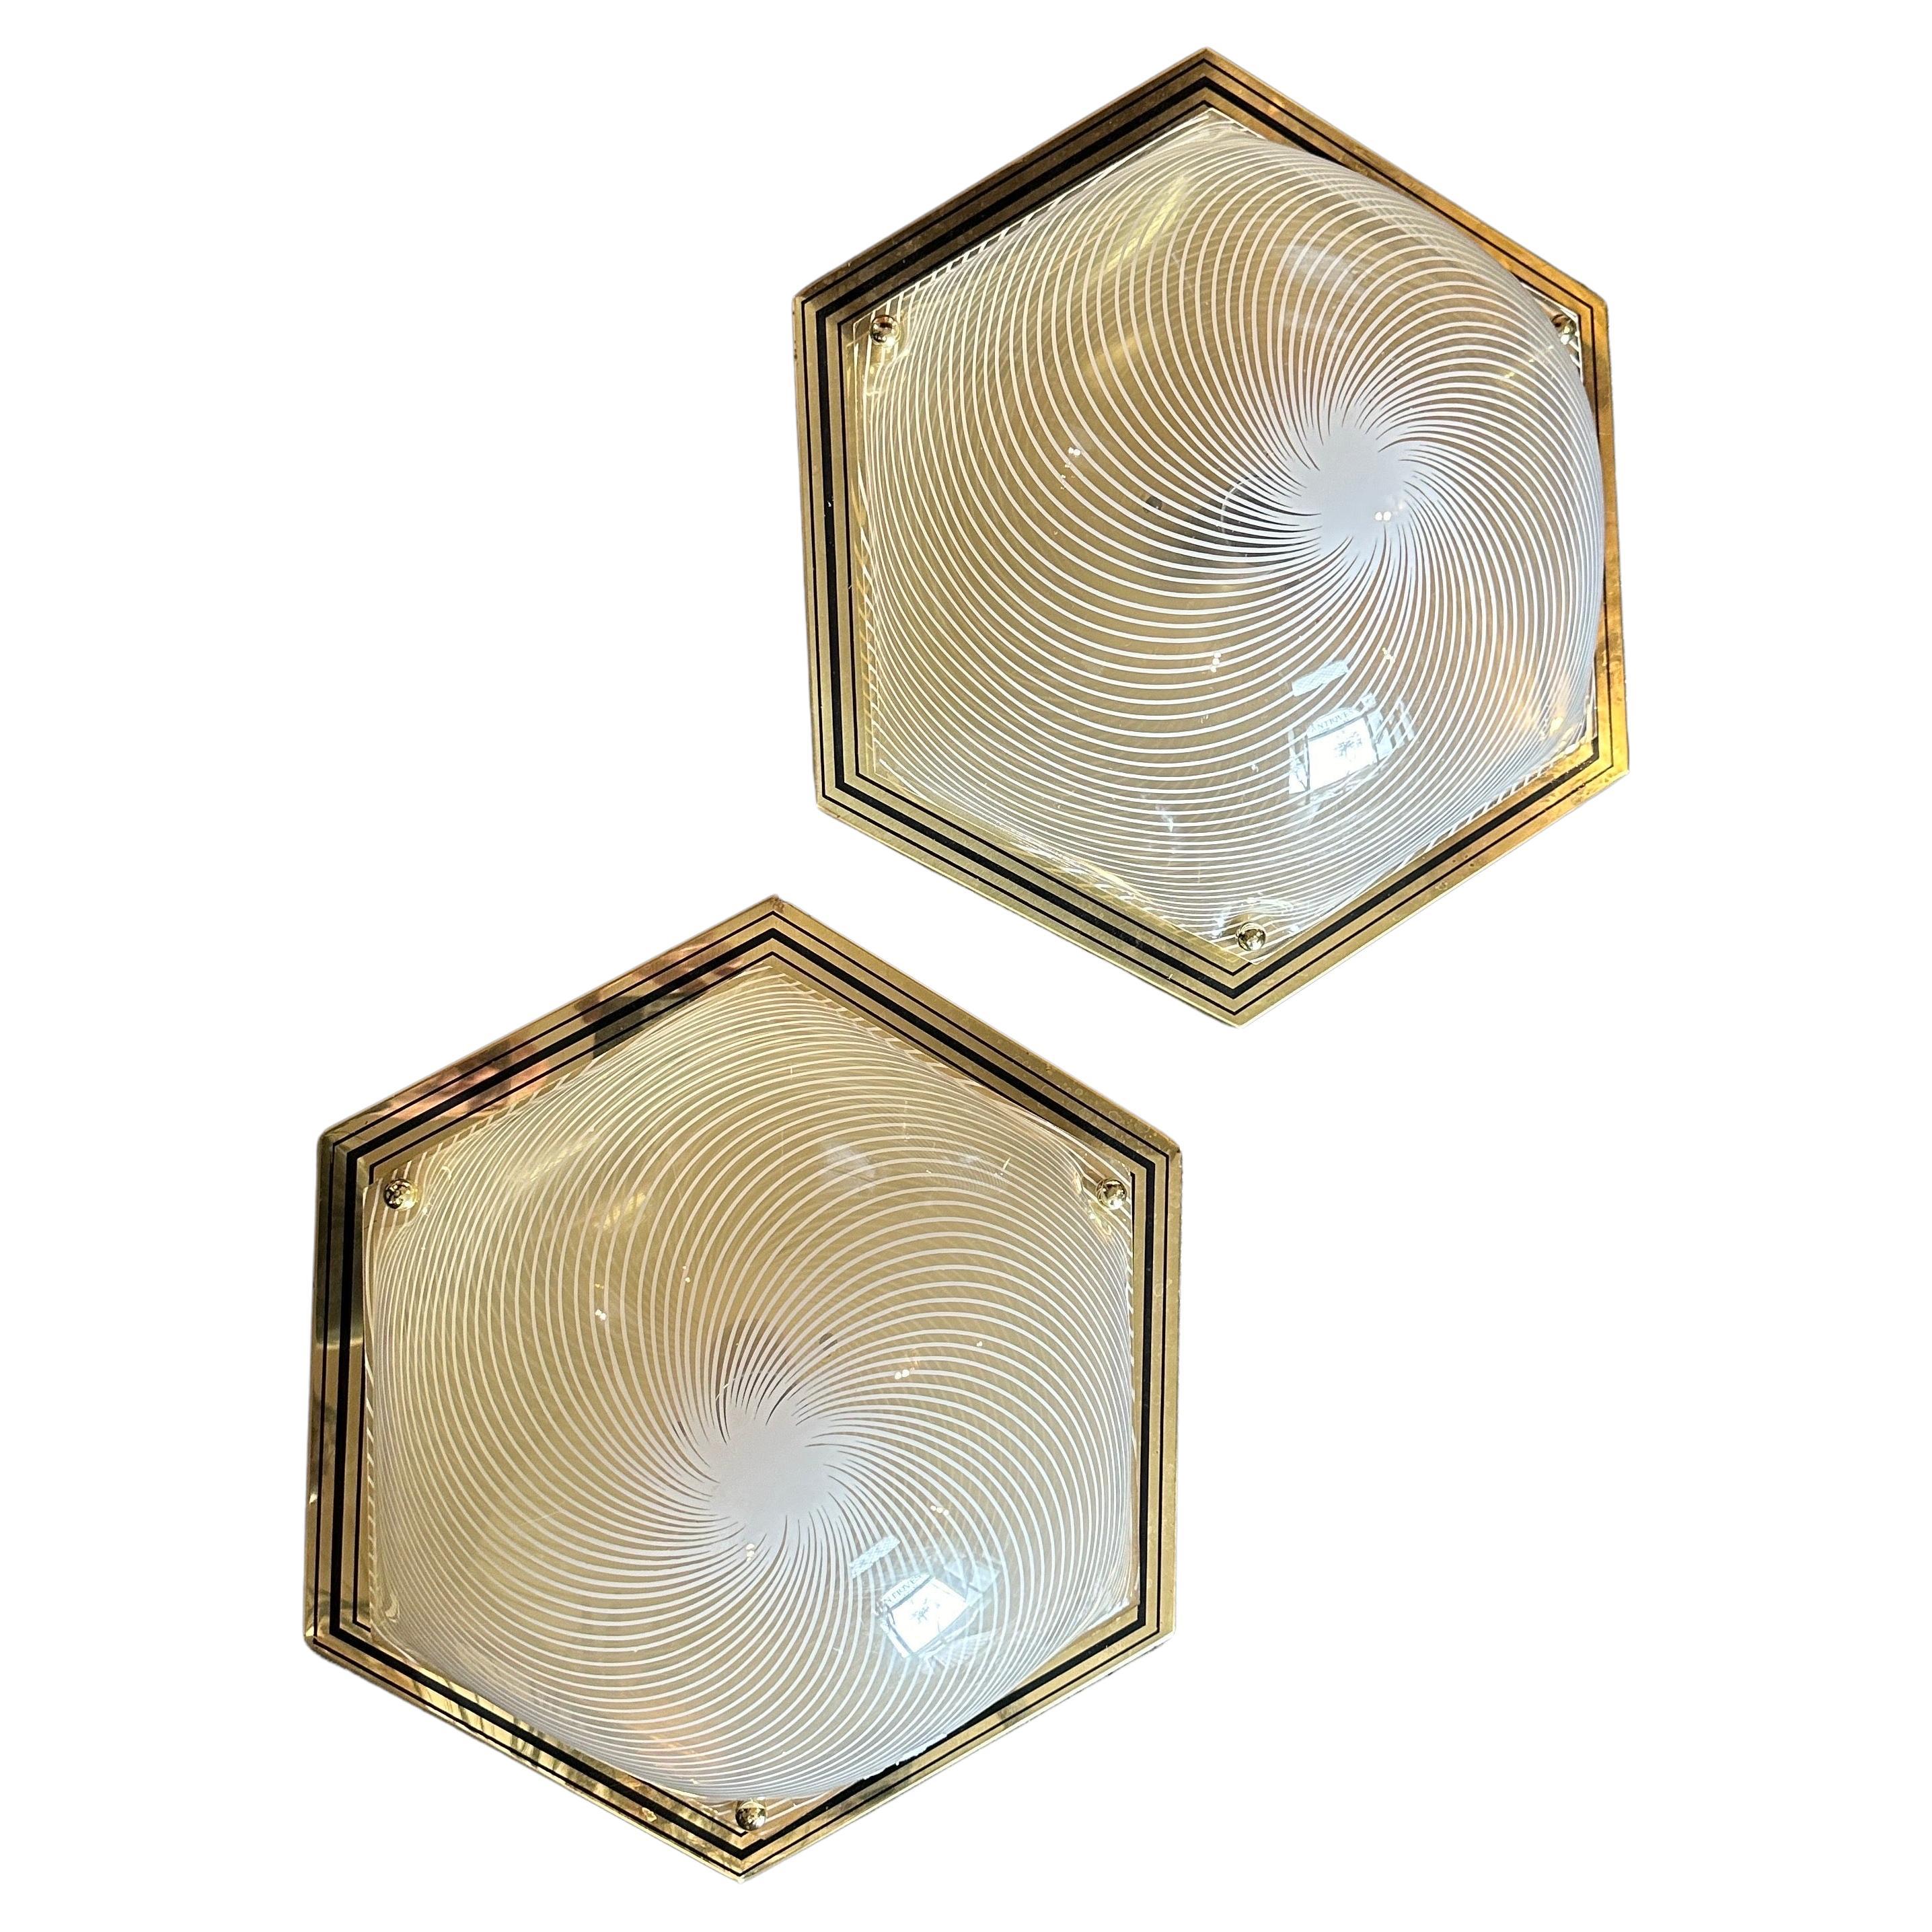 A Pair of 1970s Mid-Century Modern Hexagonal Italian Huge Wall Sconces For Sale